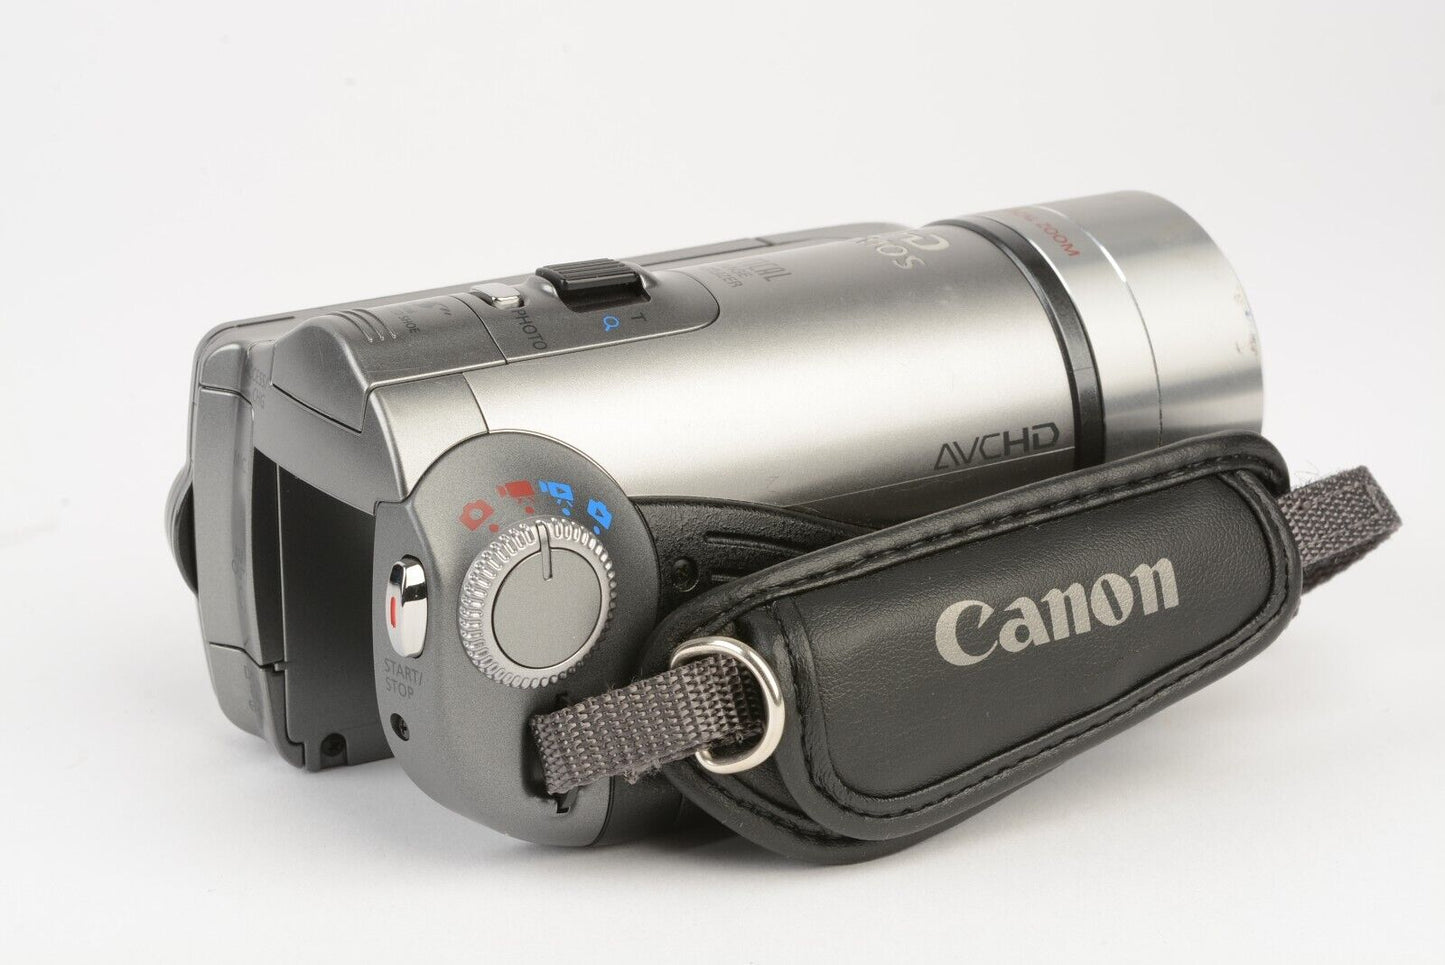 EXC++ CANON VIXIA HF100 HD CVIDEO CAMERA, BATT+CHARGER+REMOTE_CASE/PACK, NICE!!